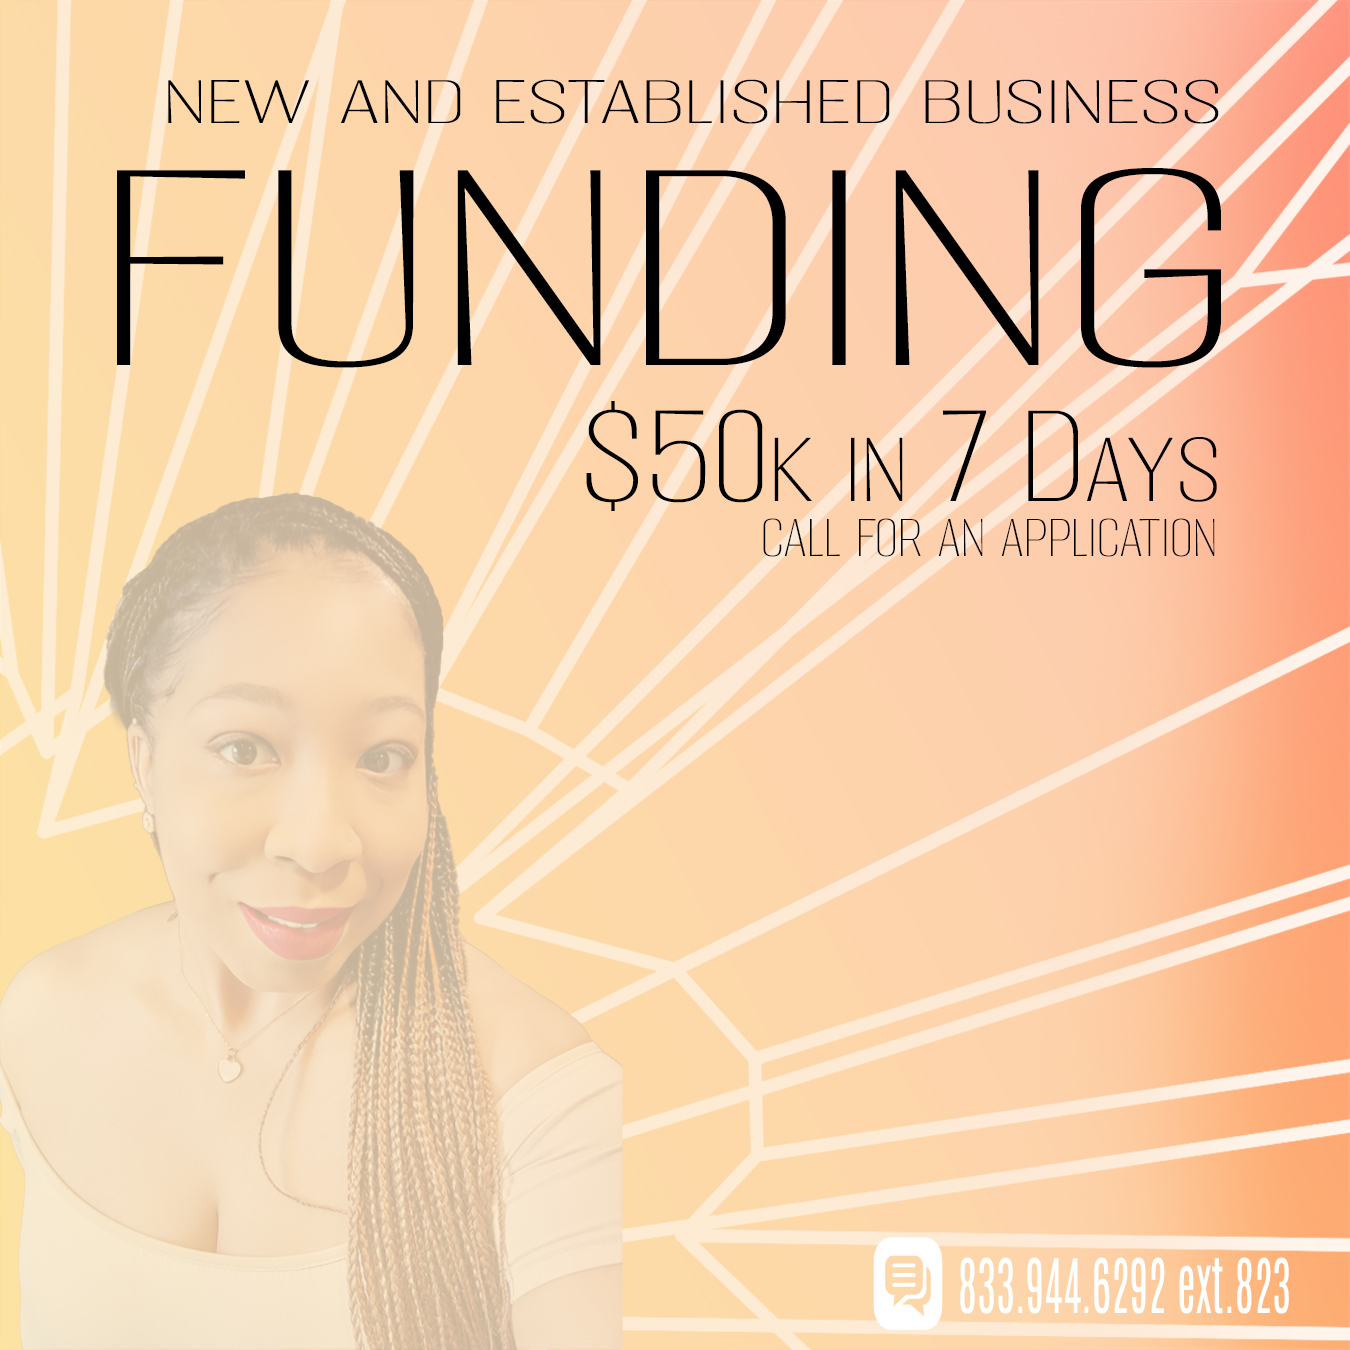 Business Funding from $10k through Nore Loans